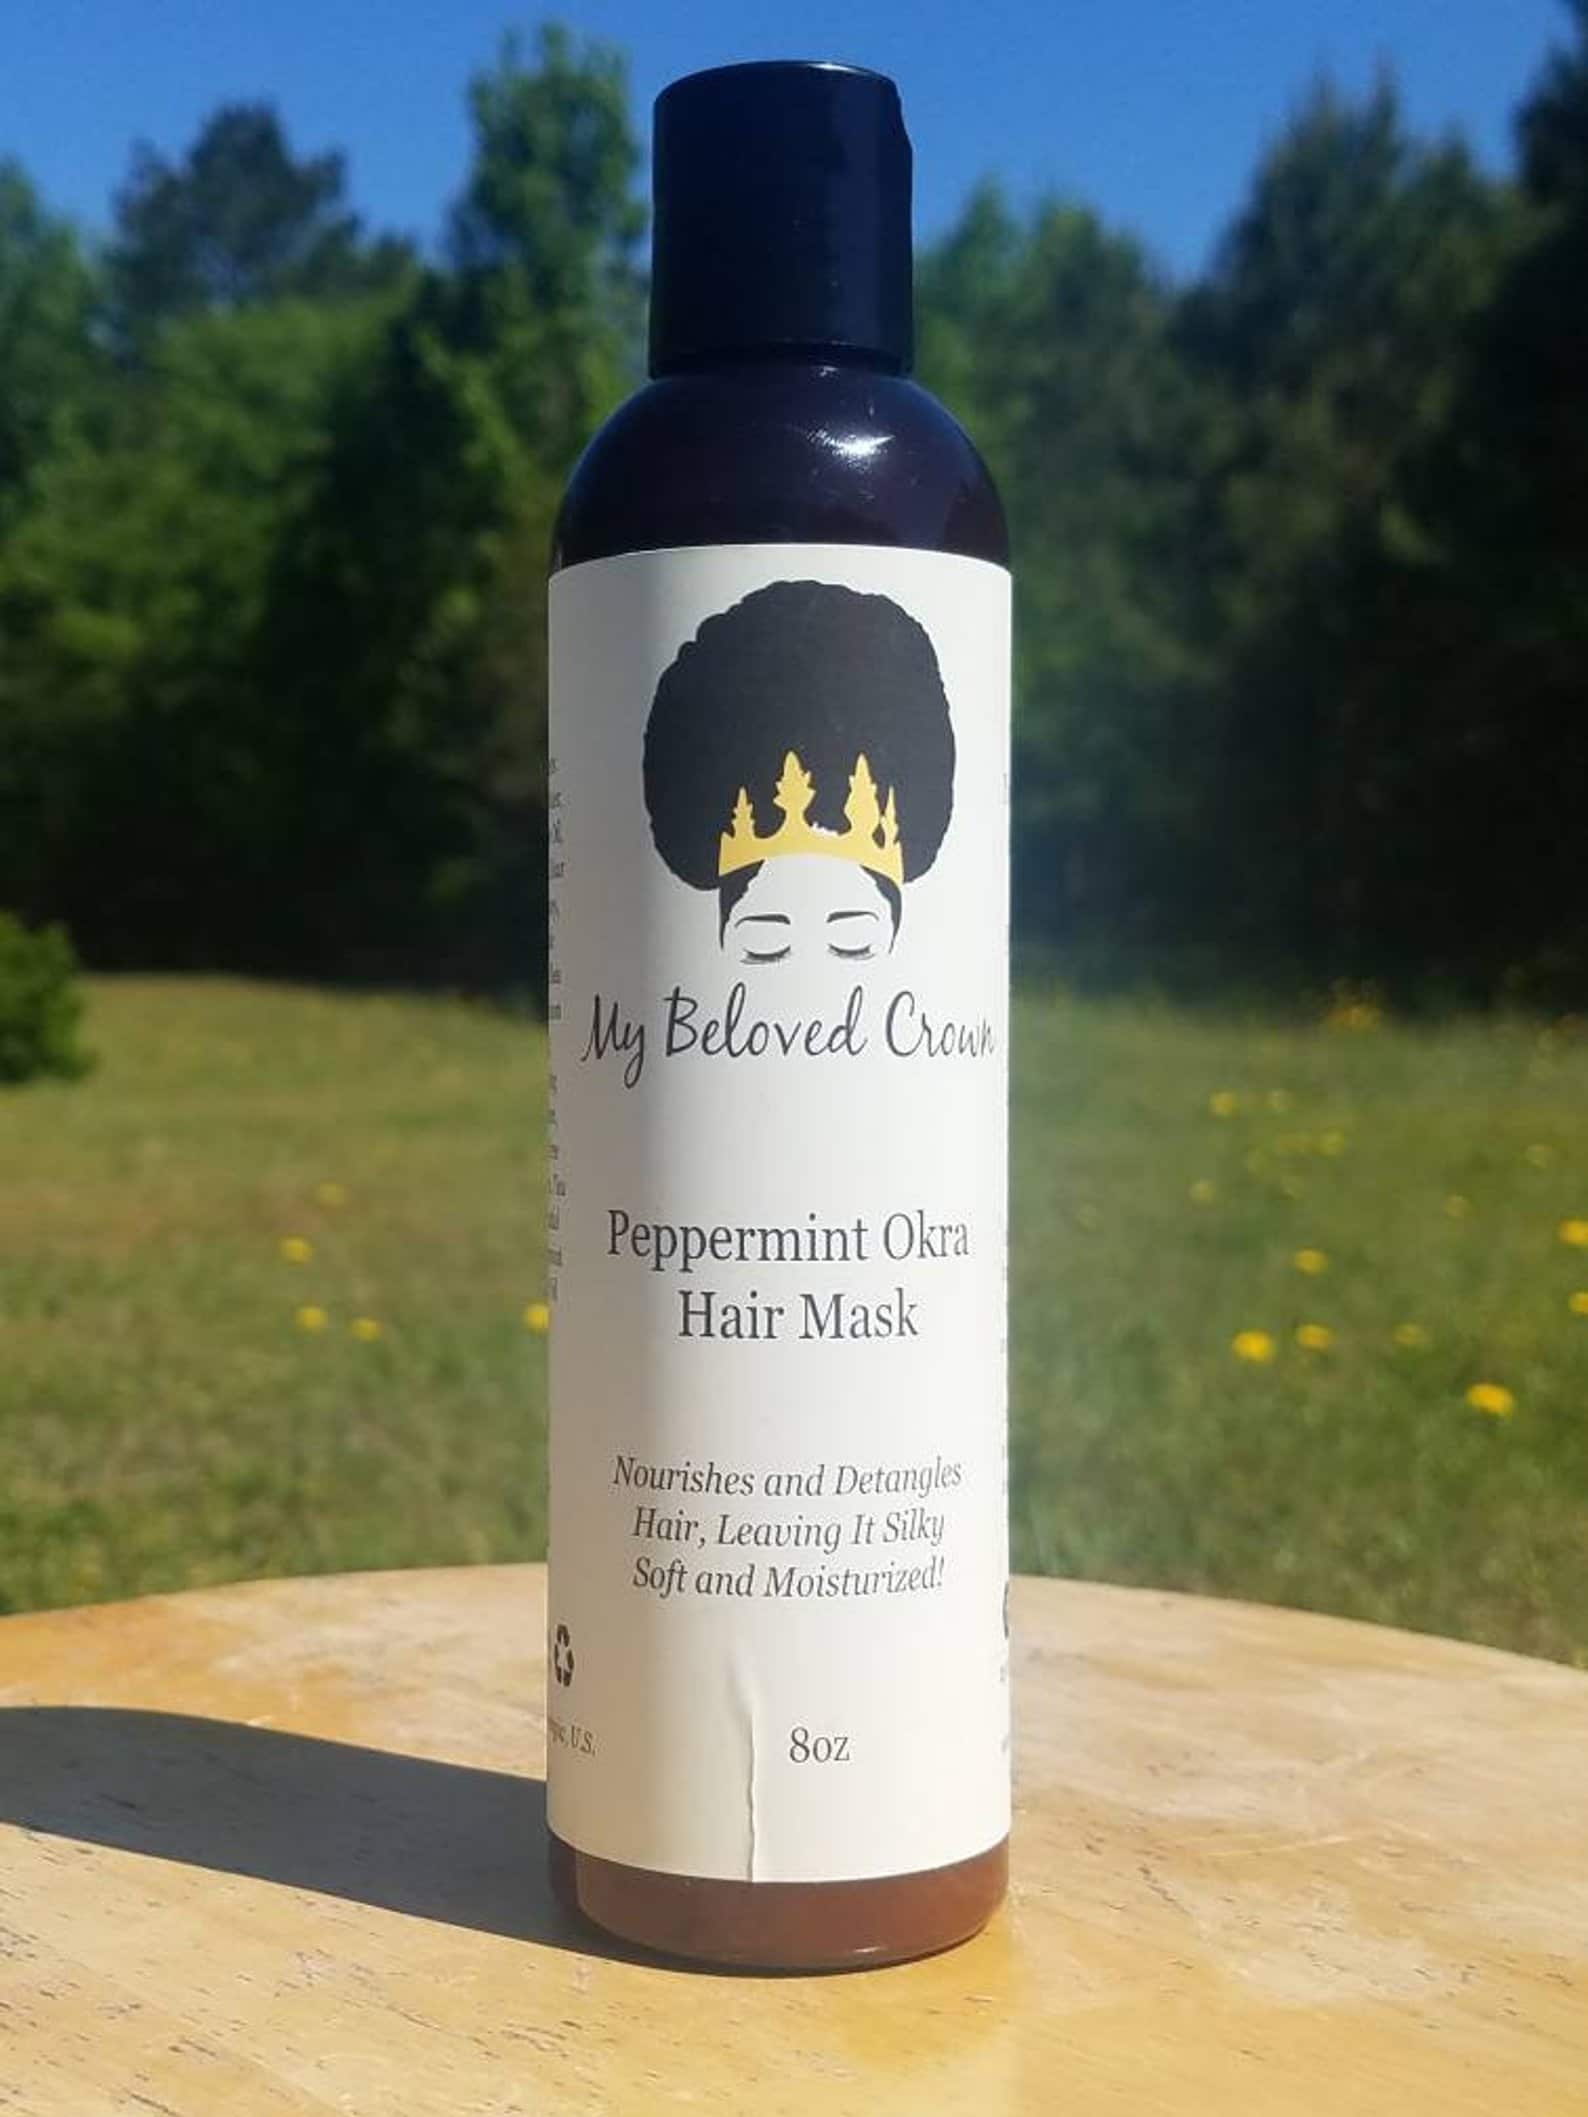 I'm Hoping These 10 Hair Products Created By Black Women Will Revive My Tresses